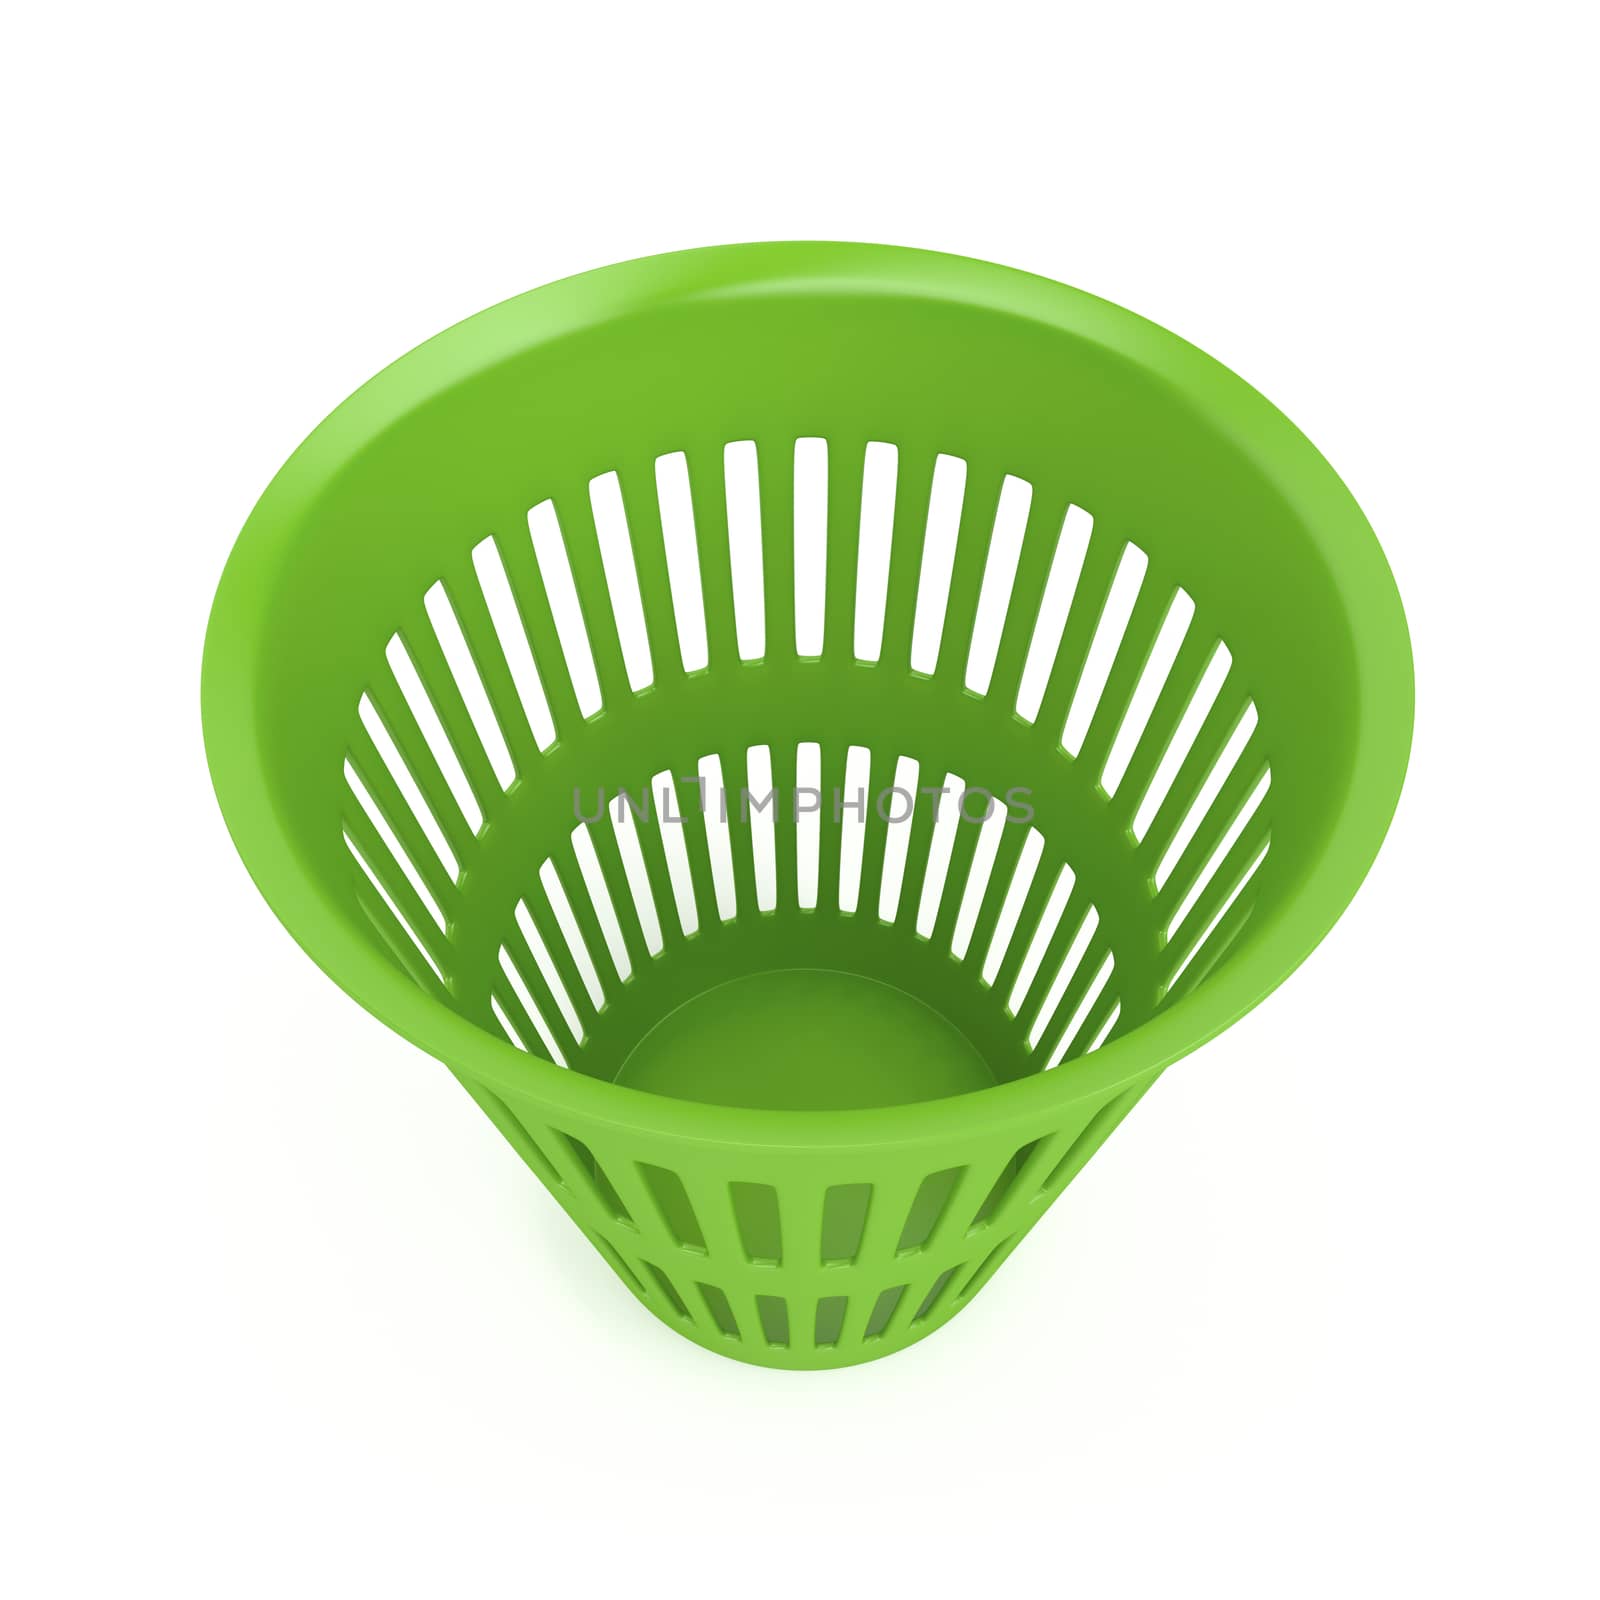 Green waste basket by magraphics